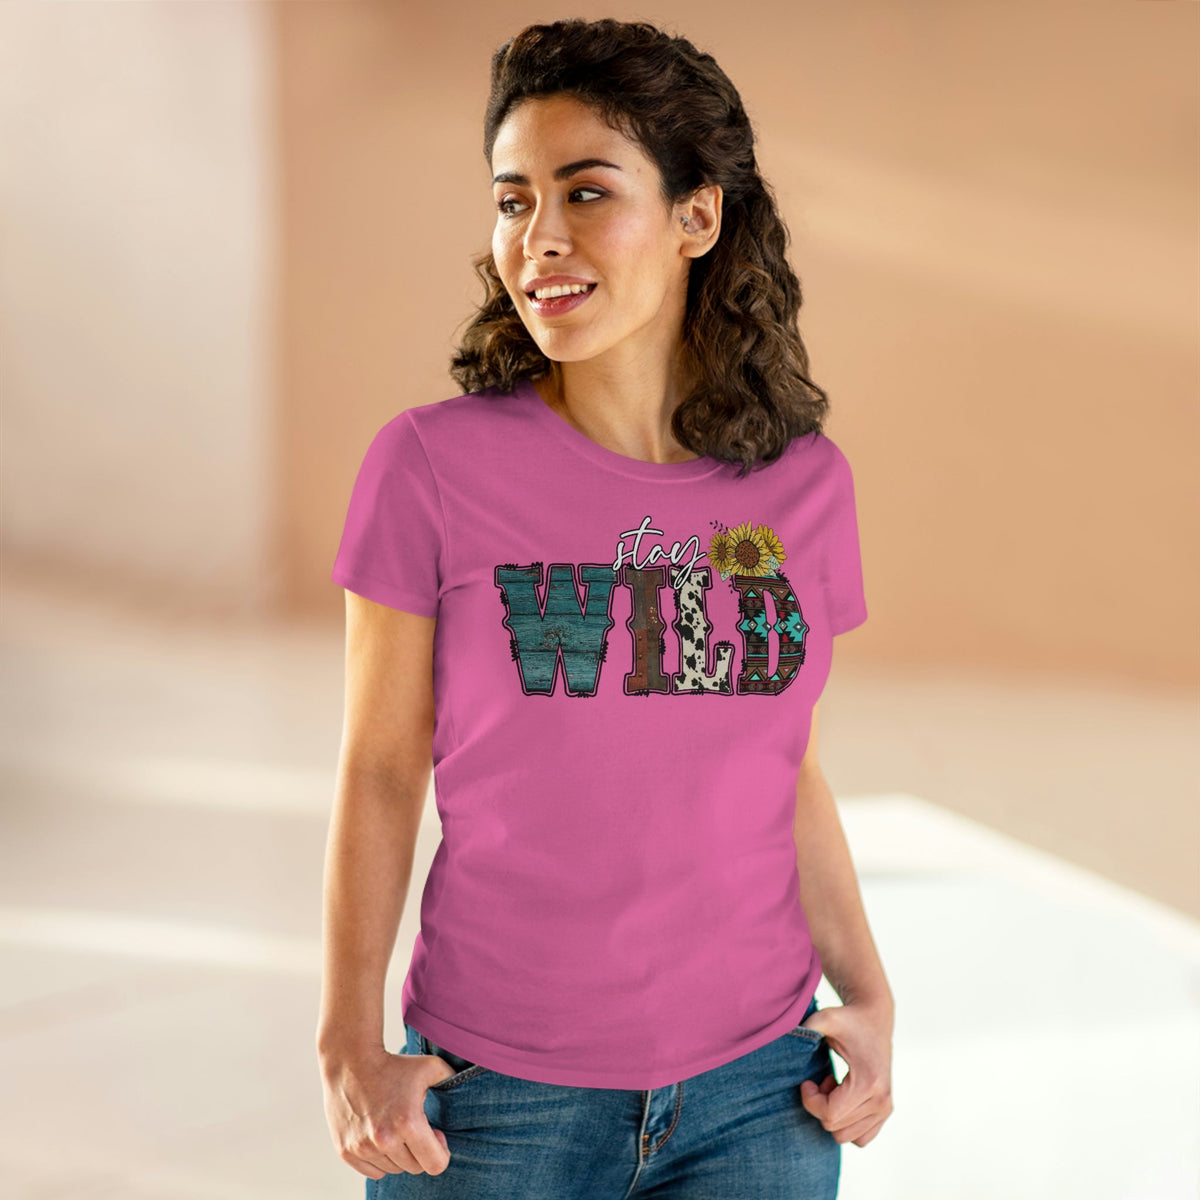 Stay Wild Women's T-shirt - Salty Medic Clothing Co.